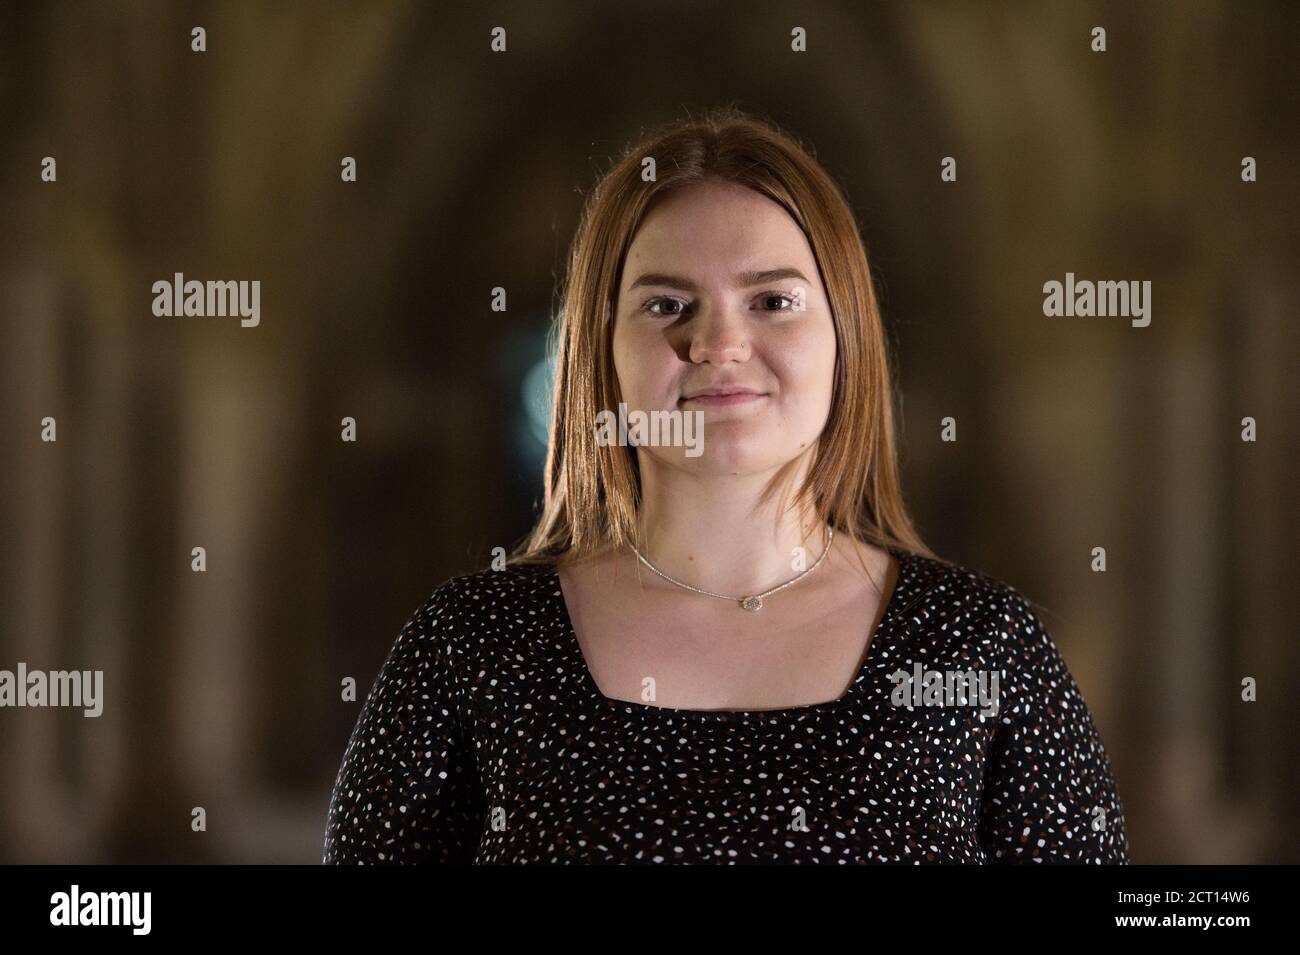 Glasgow, Scotland, UK. 20 September 2020. Pictured: Emma Margaret Currie, 2020/21 President of University of Glasgow Conservative and Unionist Association, originally formed in 1836 as the Robert Peel Club, which today is the oldest Conservative and Unionist Association in the United Kingdom. Credit: Colin Fisher/Alamy Live News. Stock Photo